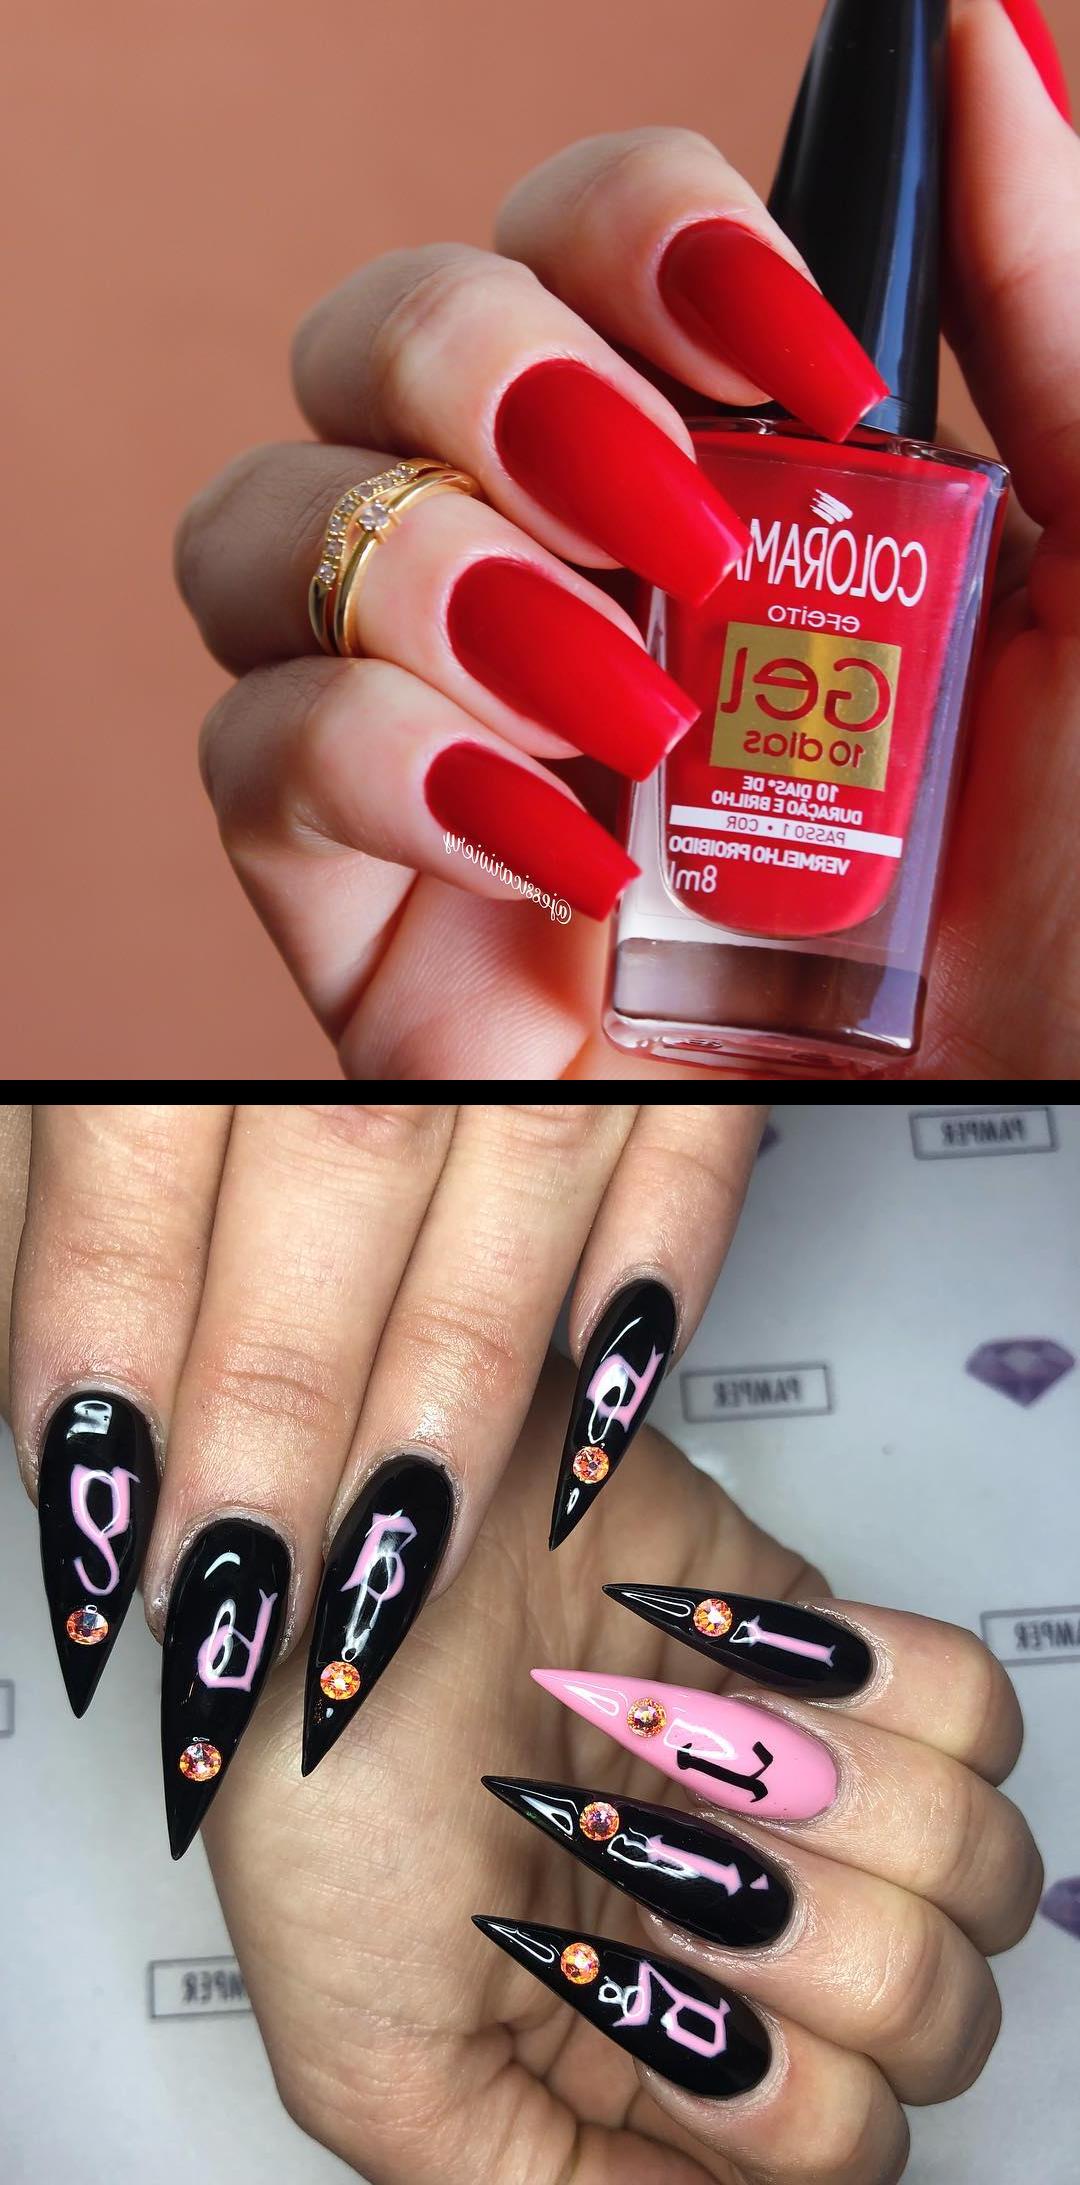 la nails, black toenail, color street nails, essie gel couture, pointy nails Boa noite amores! Vermelho Proibido da nova coleda esmaltecolorama Meninasss essa colenova jchegou na perfumariainova e vcs tdescontinho no site! Usem JESSICARIVIERY A loja envia para todo o Brasil! Sculpted Stiletto Nails | GirlOld English Lettering | Inspired by impekablenails . your next Full Set, Fill, or Pedi service at pampernailgallery.com Now open in Fremont, California!. Click nowselect a service, and tap my name to book an appointment with me. DM me  if you have any questions . . Tags: , getpamper , pampernailgallery , nails , oaklandnails , sanjosenails , sfnails , bayareanails , bayareanailtech , sculptednails , nailforms , acrylicnails , jellynails , clearnails , nails , nailsonpoint , holonails , nailporn , swarovskinails , fancynails , gemstonenails , rhinestonenails , shinynails , babygirl , babygirlnails , blacknails , pinknails , stilettonails , pointynails , longnails 